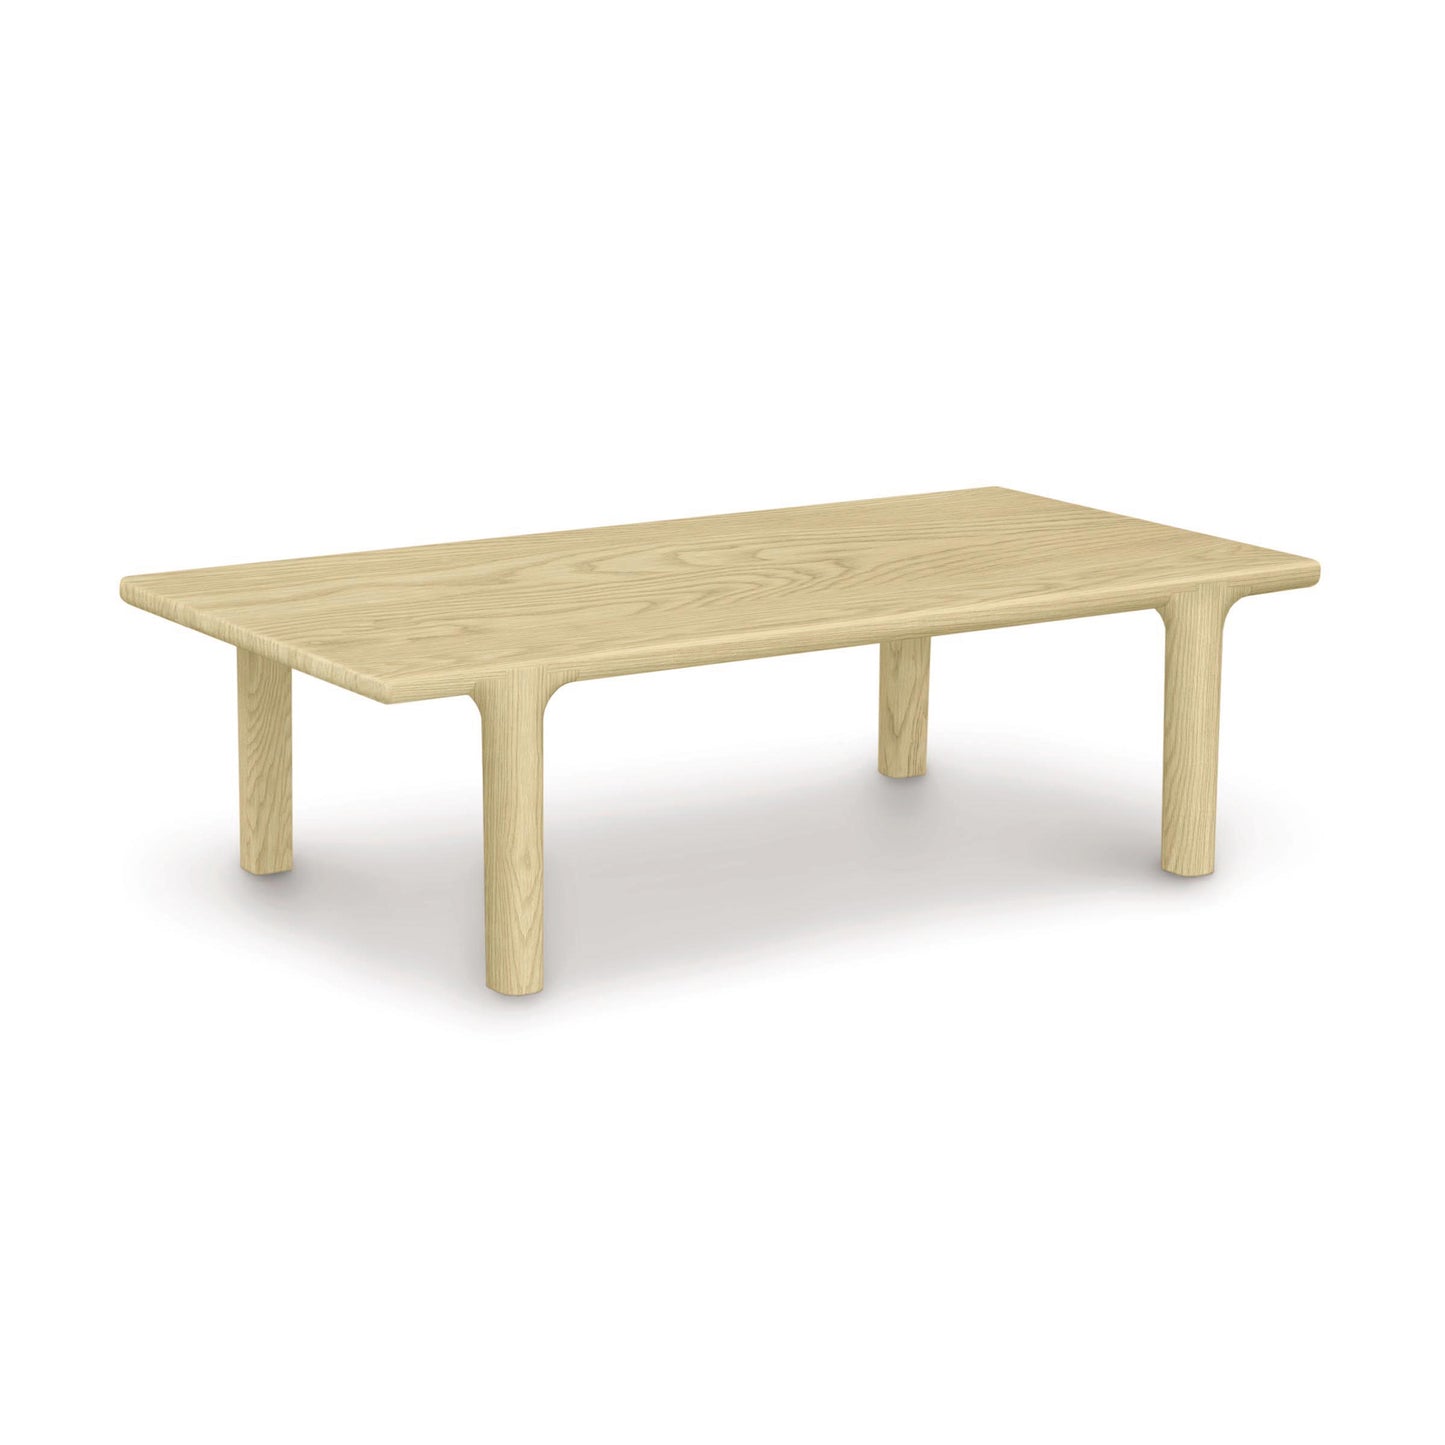 A solid North American hardwood table with a rectangular top and four legs from the Copeland Furniture Sierra Rectangular Coffee Table Collection, against a white background.